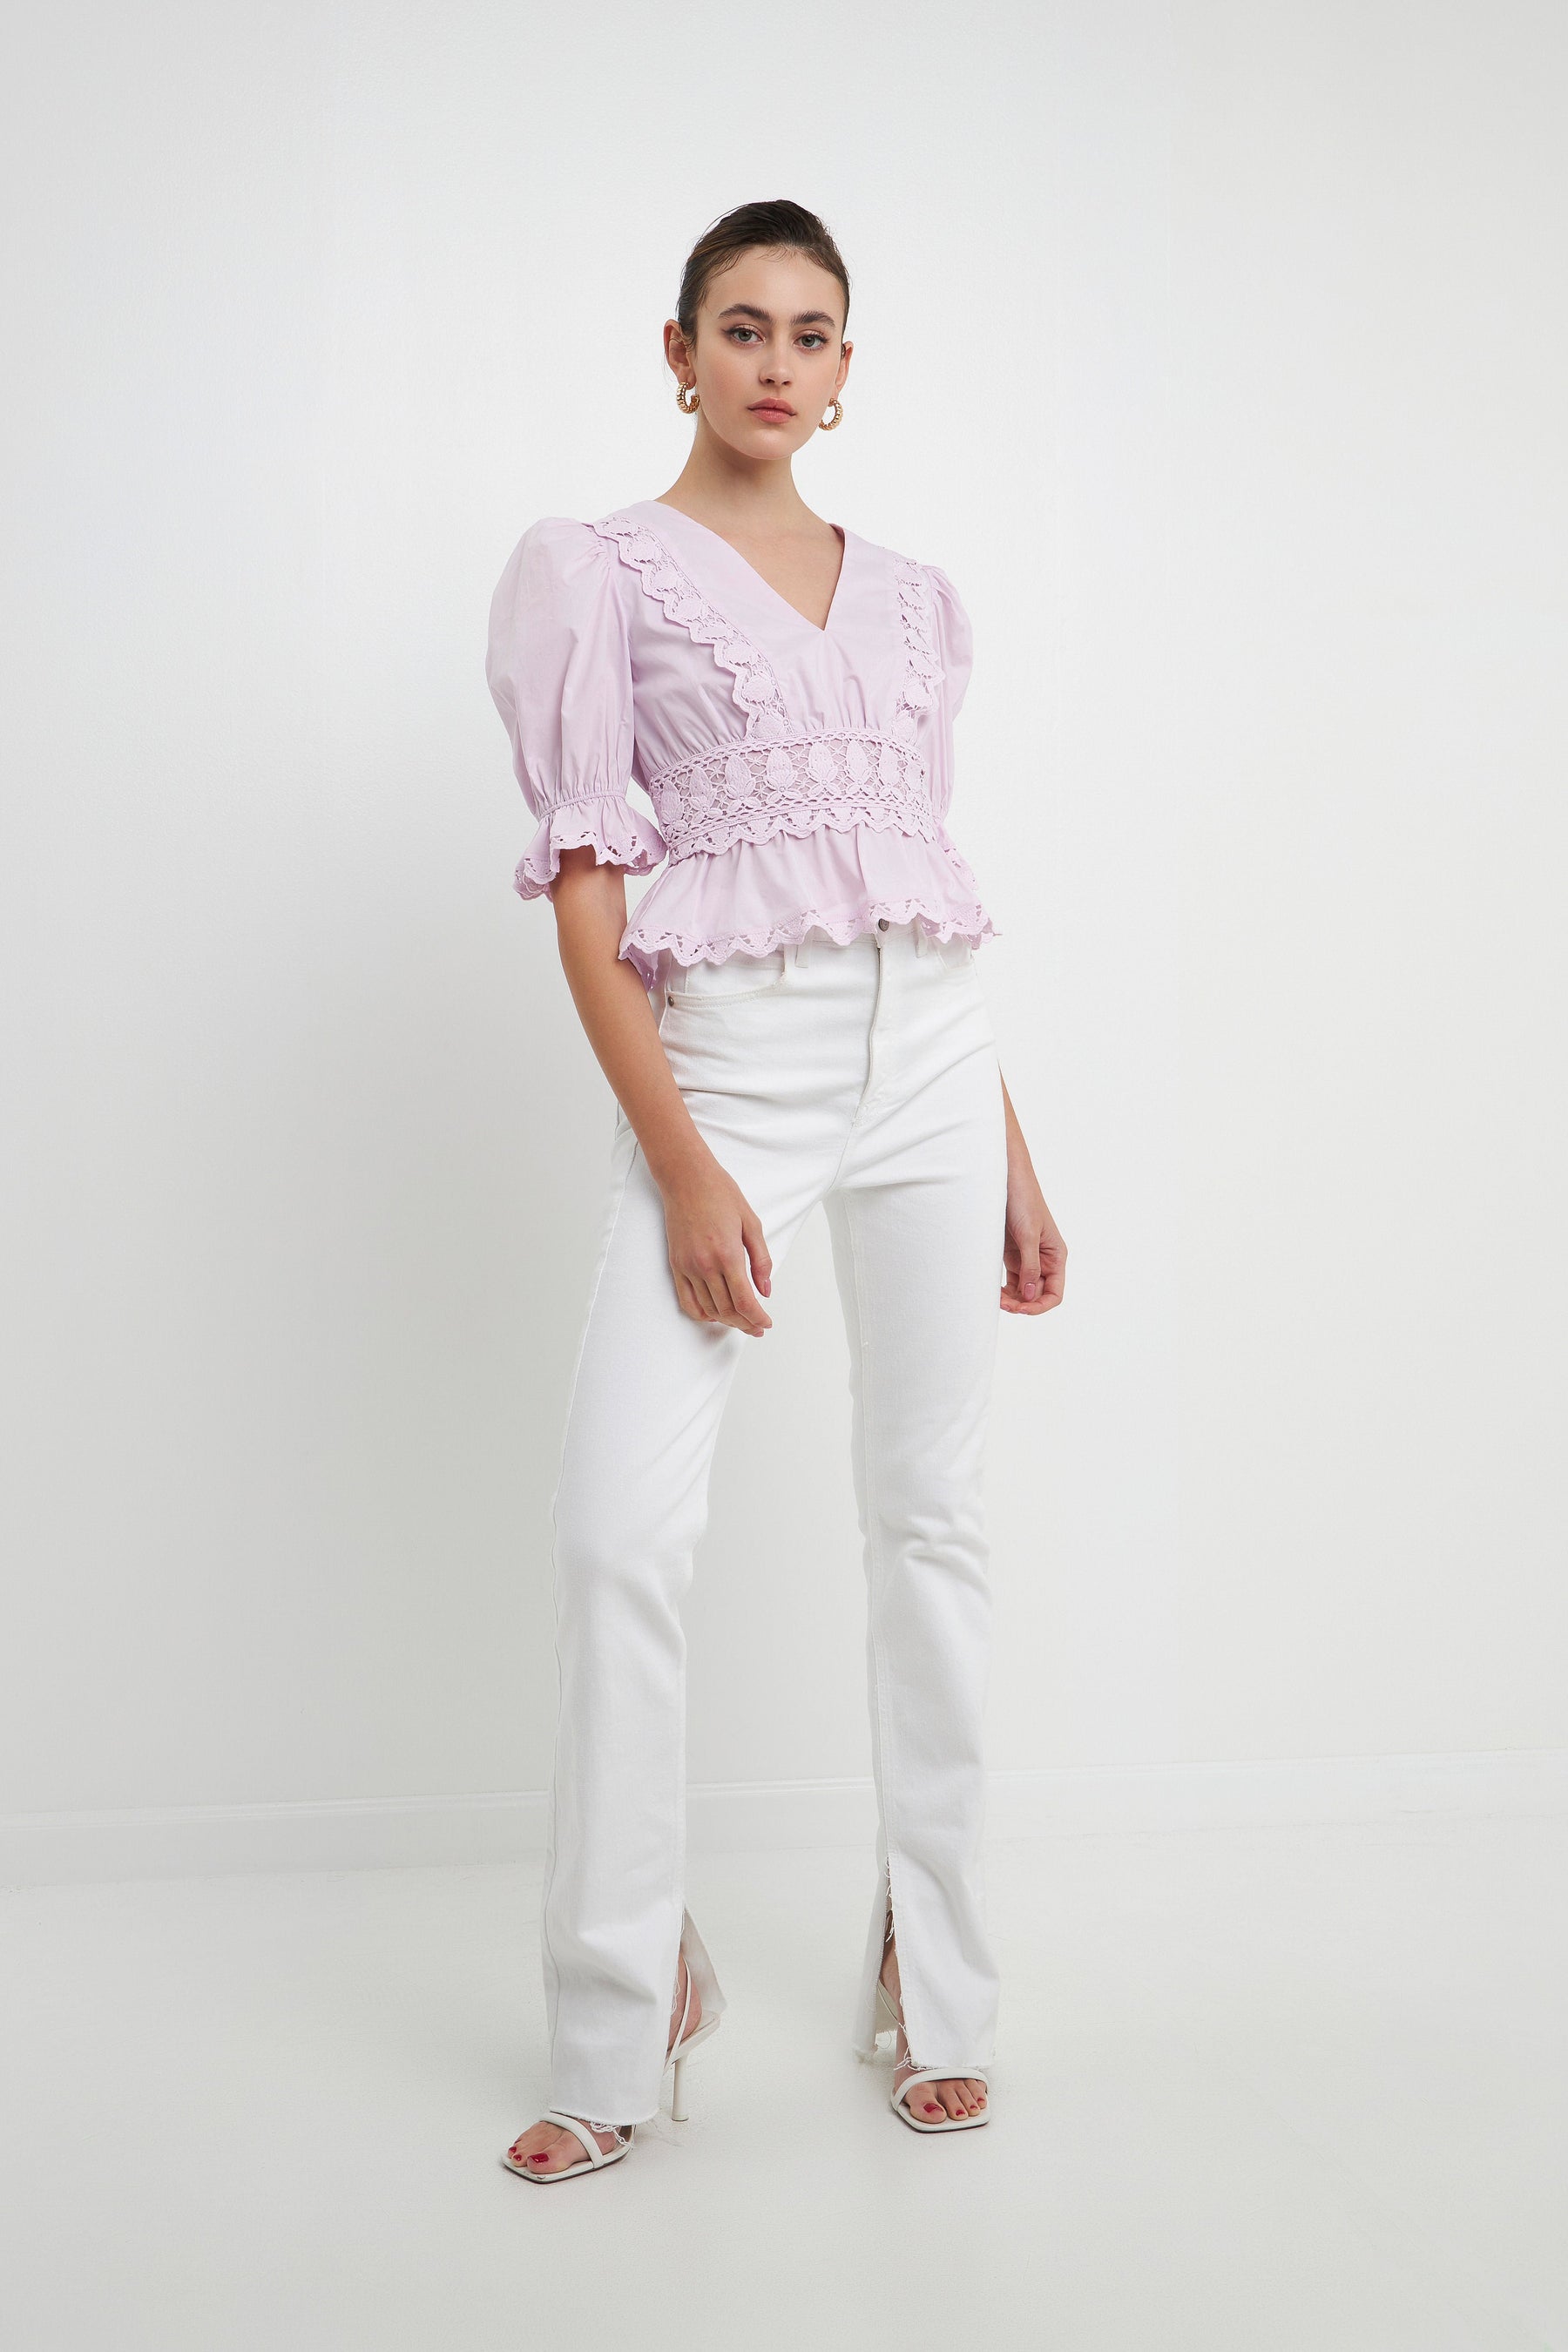 ENDLESS ROSE - Combination Eyelet Lace Top - TOPS available at Objectrare